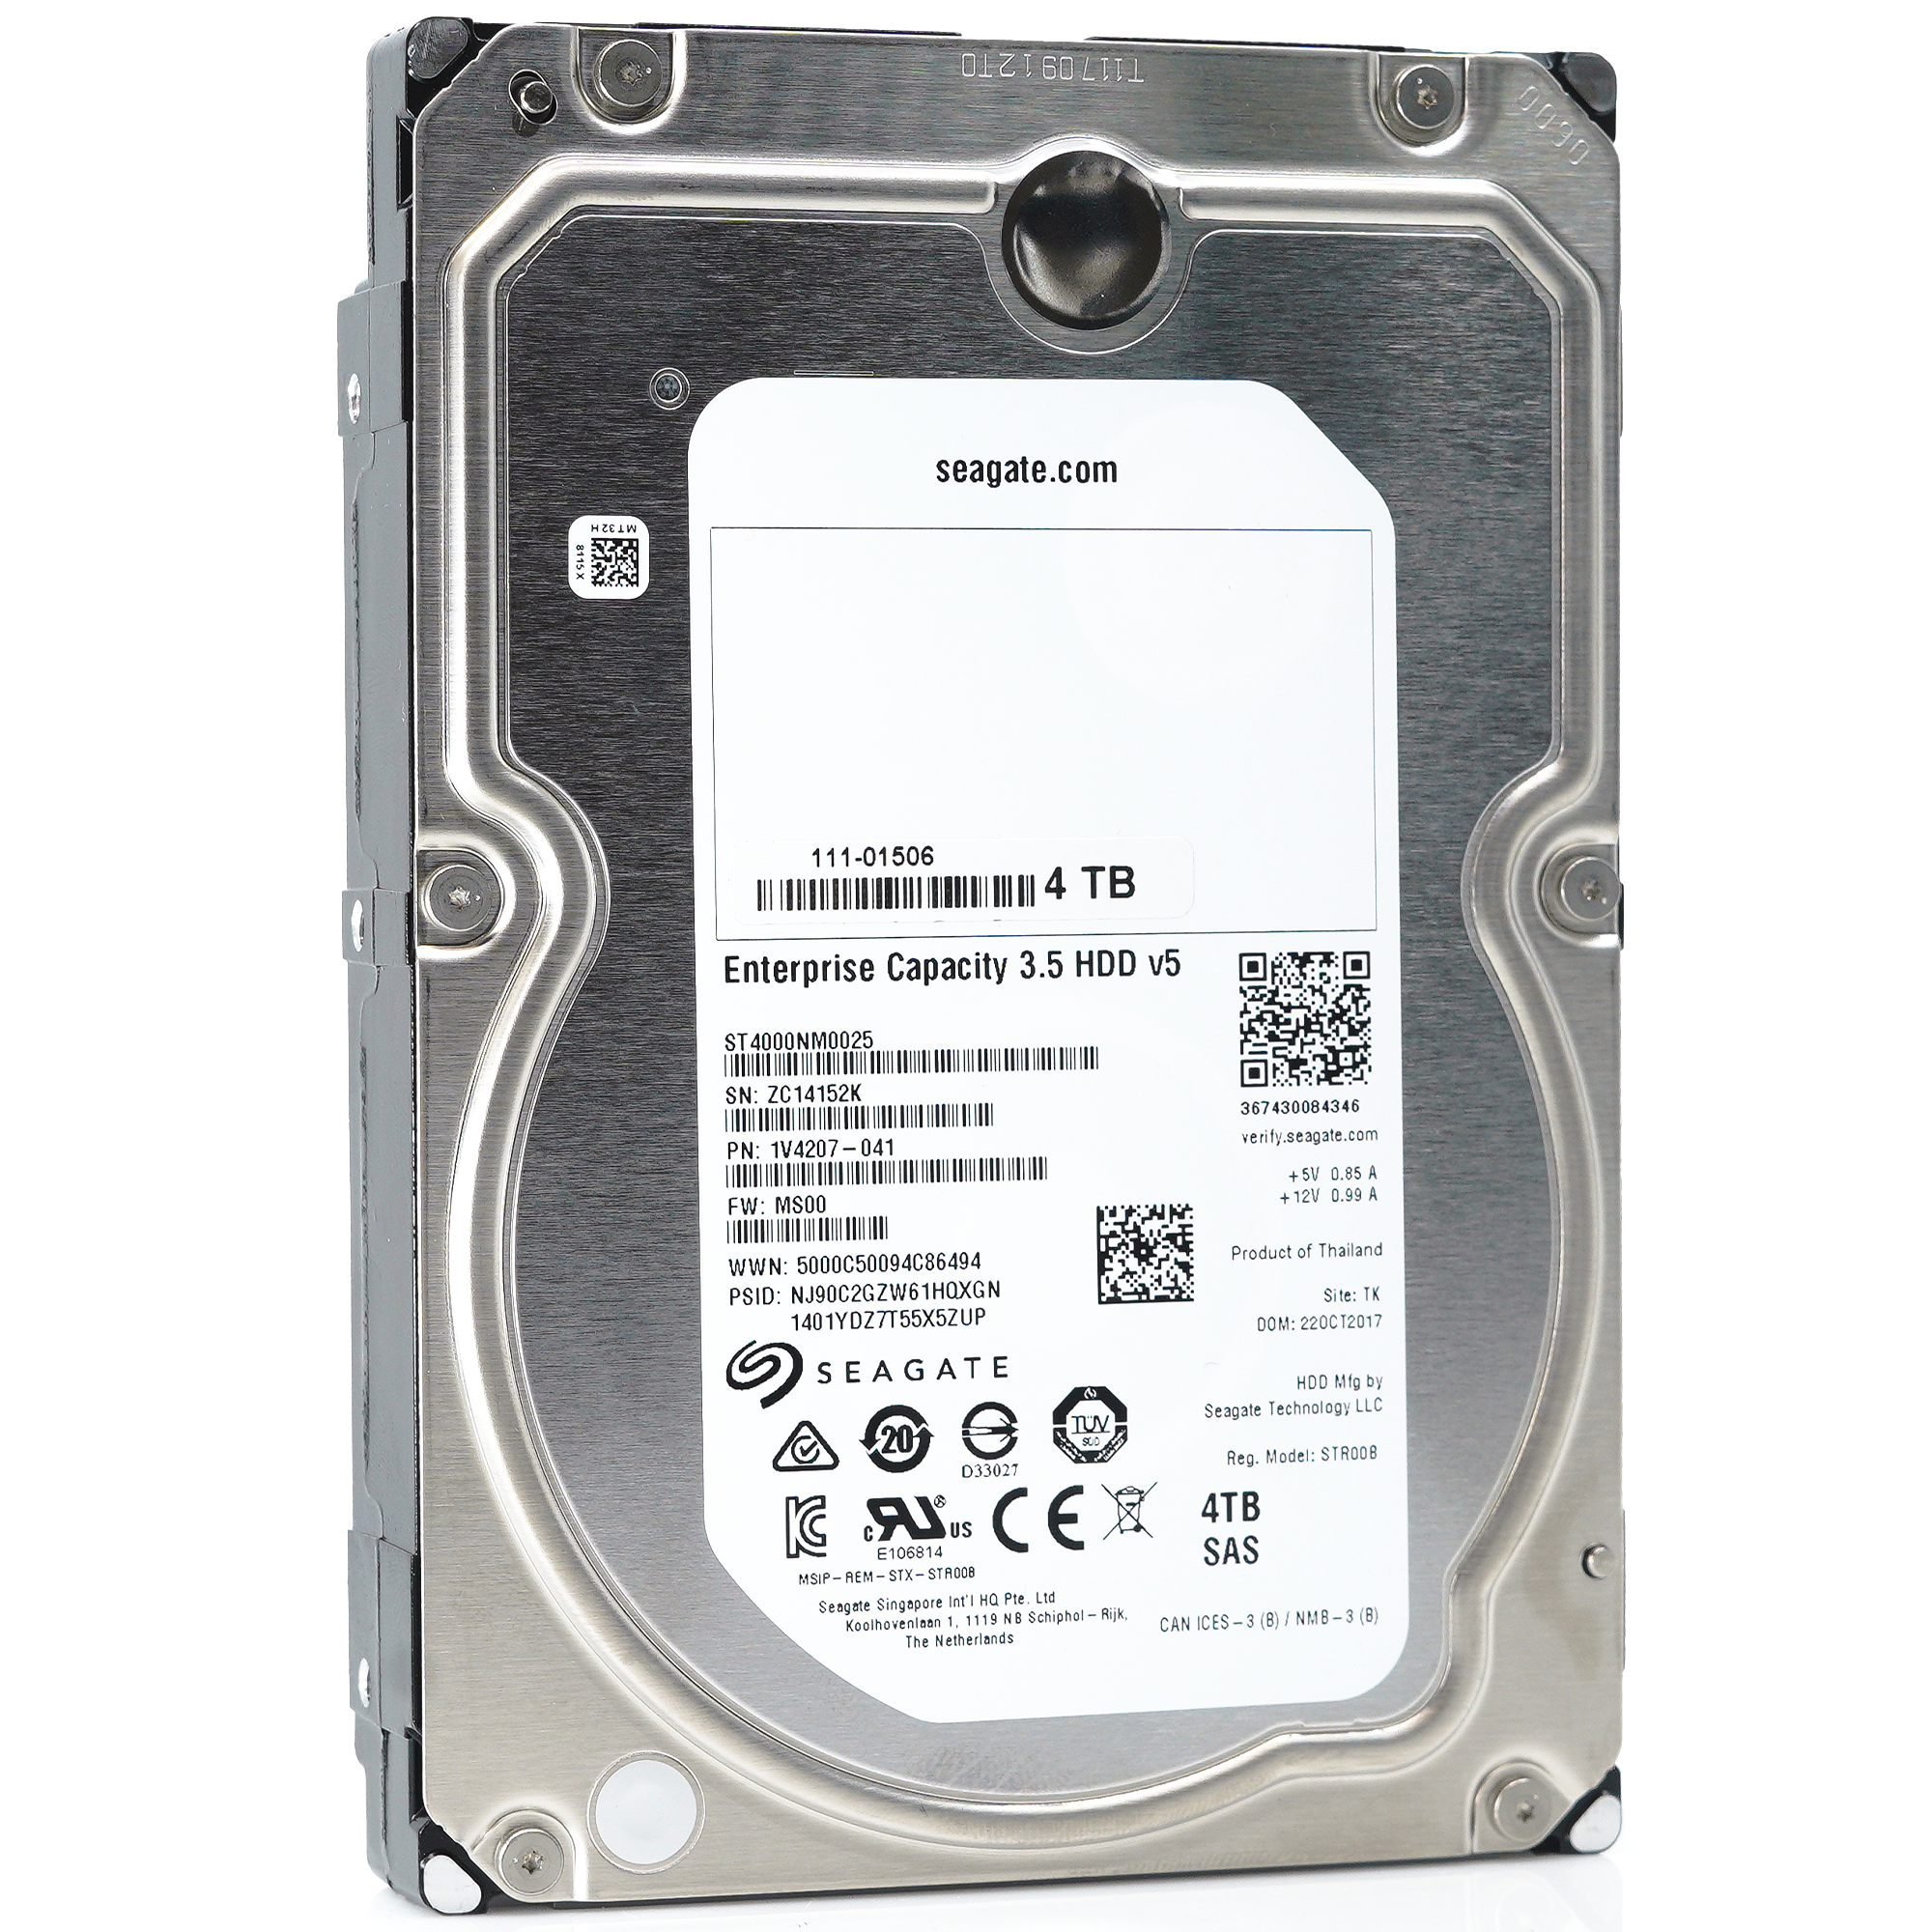 Seagate Exos 7E8 ST4000NM0025 4TB 7.2K RPM SAS 12Gb/s 512n 128MB 3.5" Hard Drive - Front Angle View